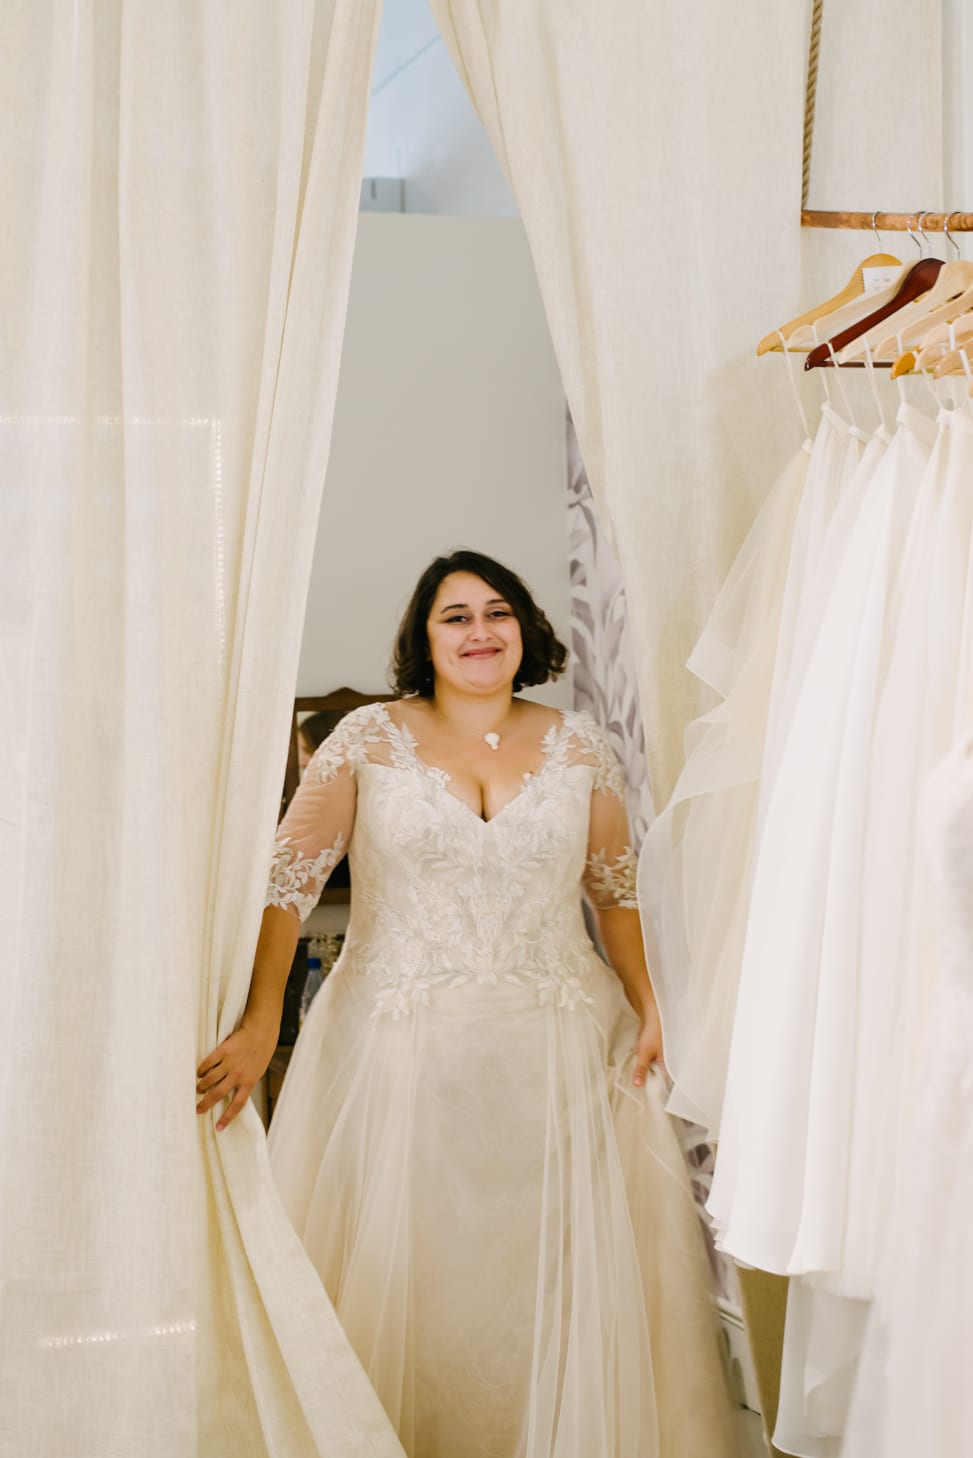 plus size brunette woman walking out of the dressing room with her white, v neck lace wedding dress on and a smile on her face at Lace and Liberty